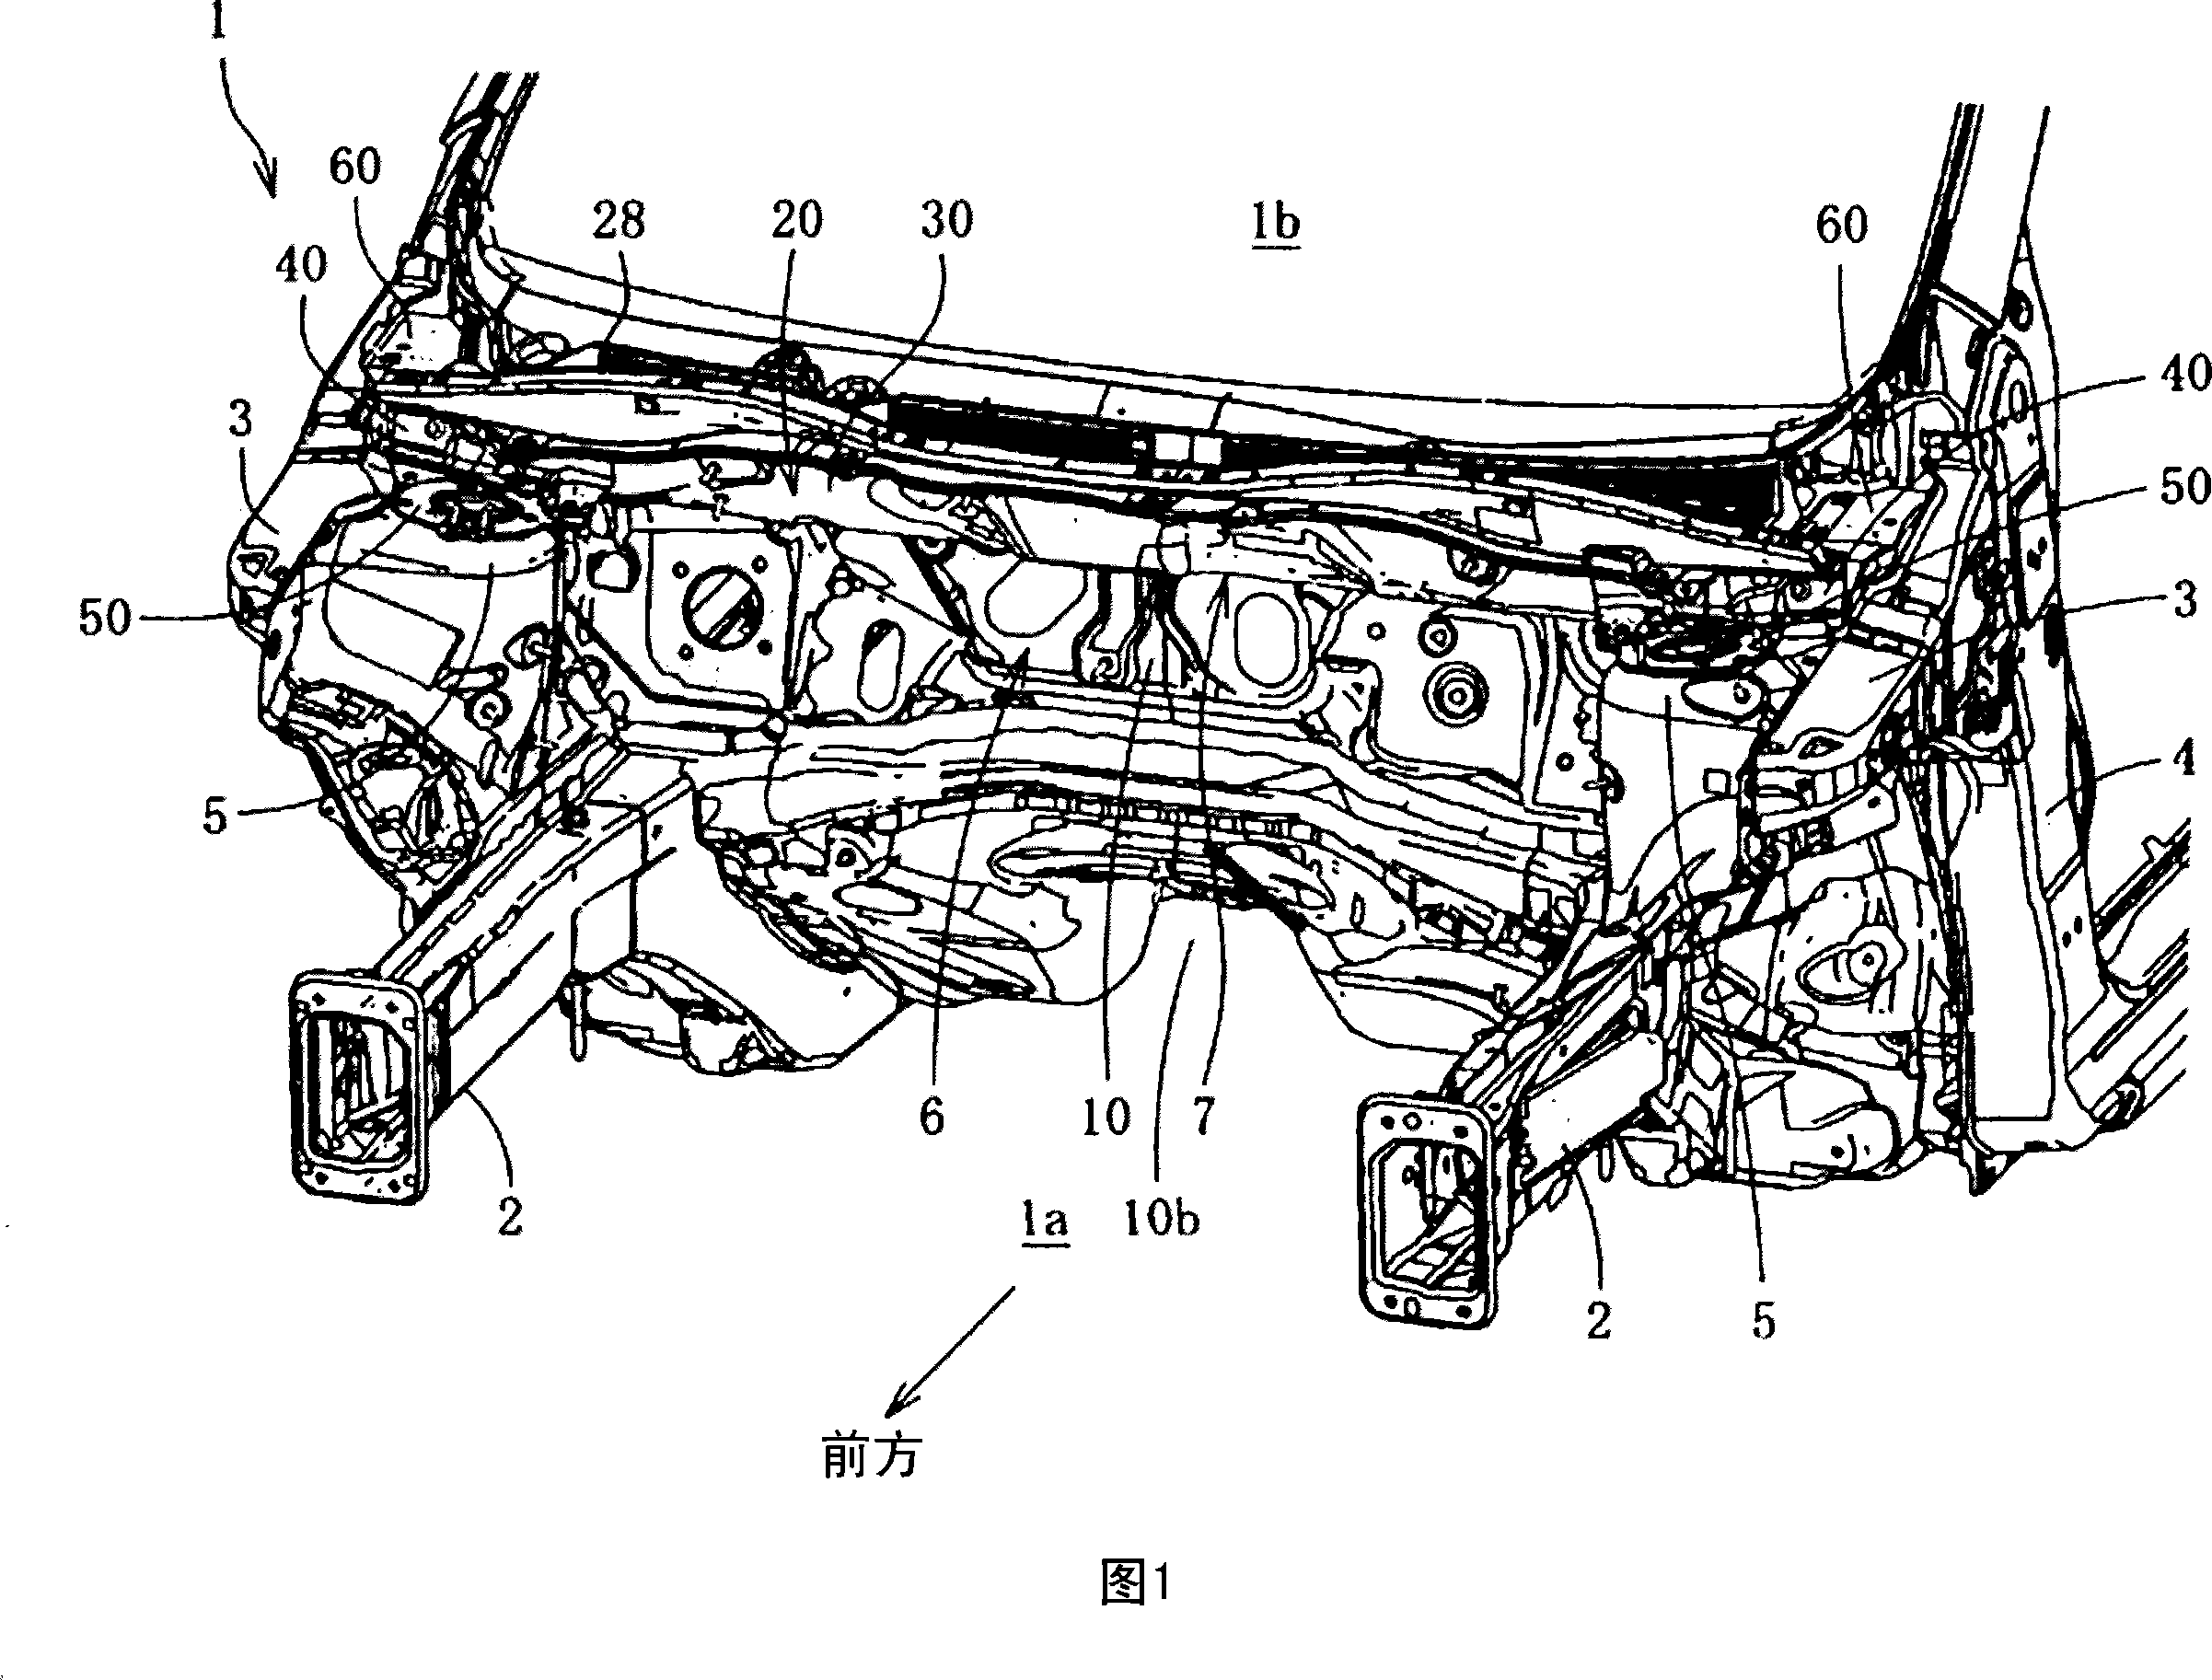 Front vehicle body structure